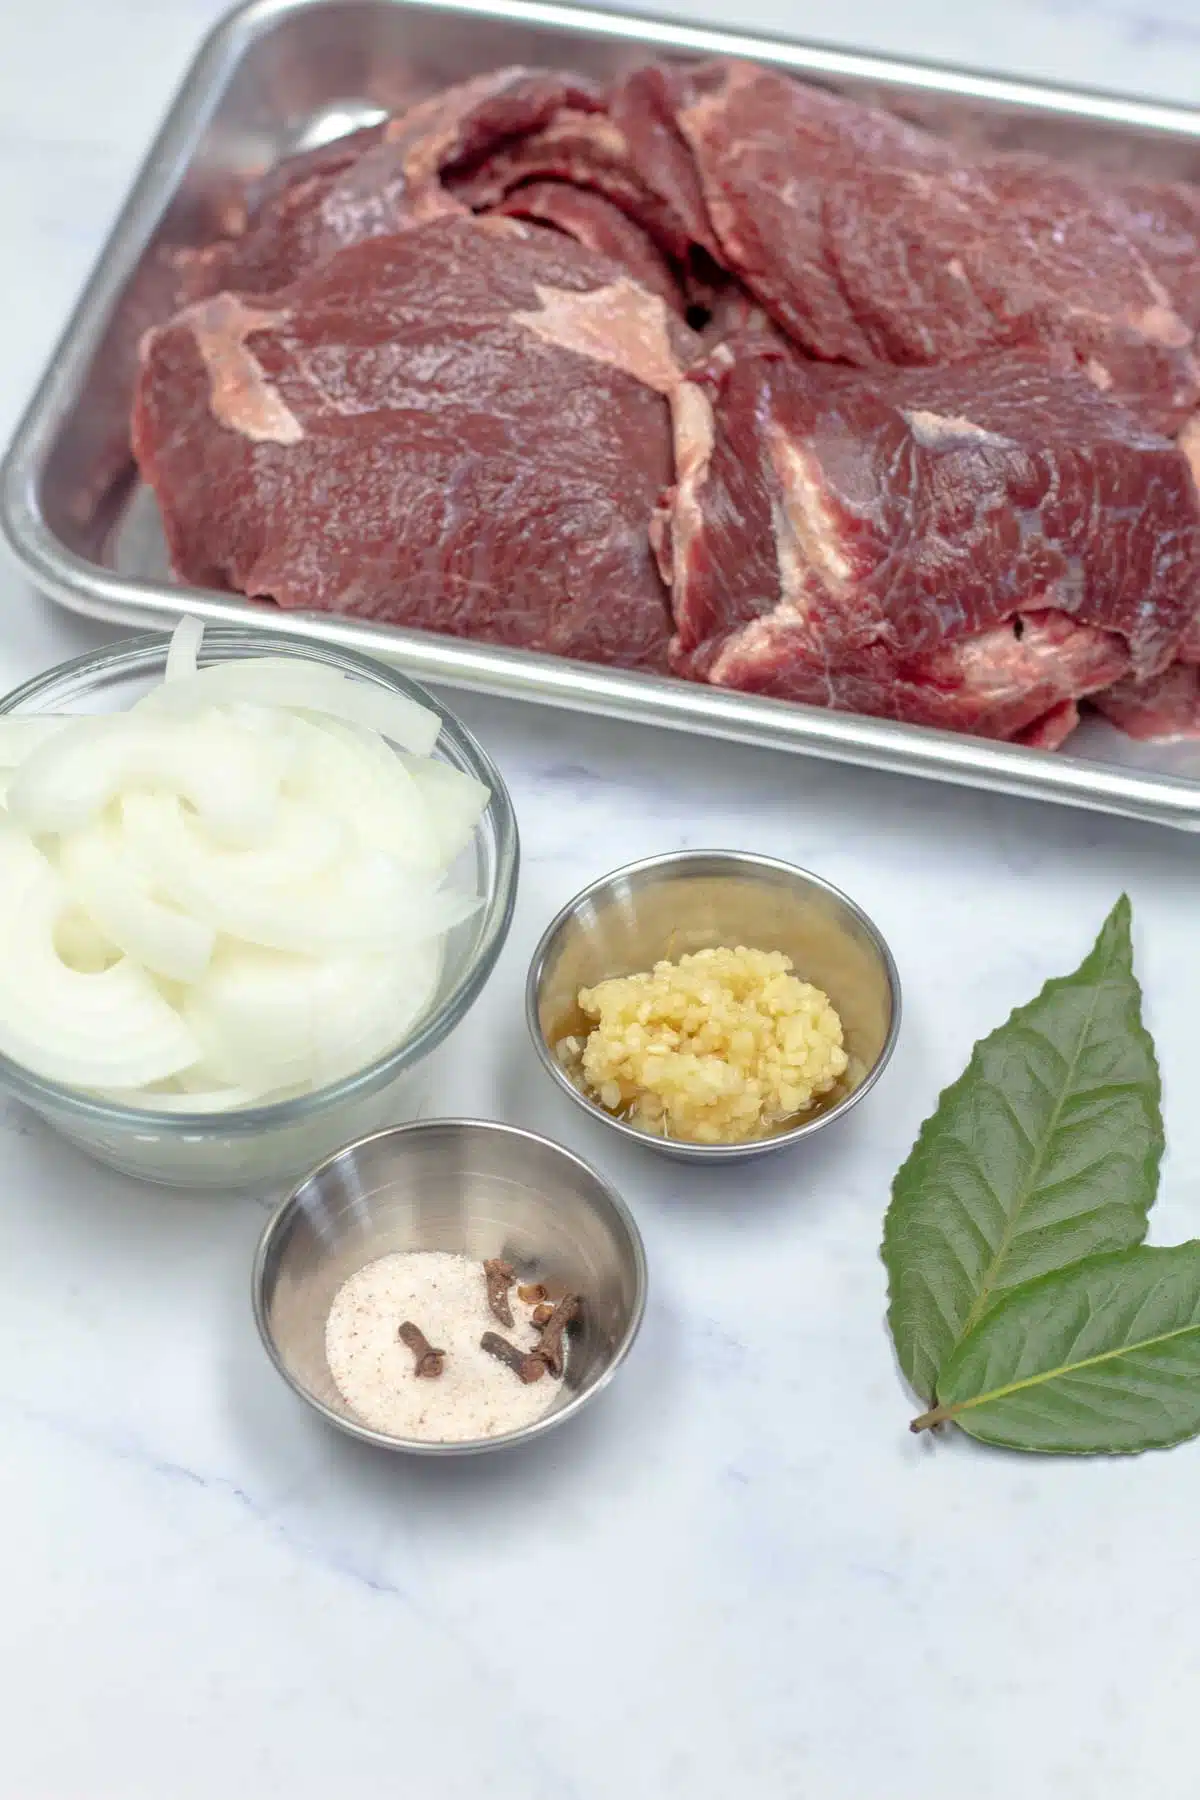 Tall image showing ingredients needed for slow cooker beef cheeks.